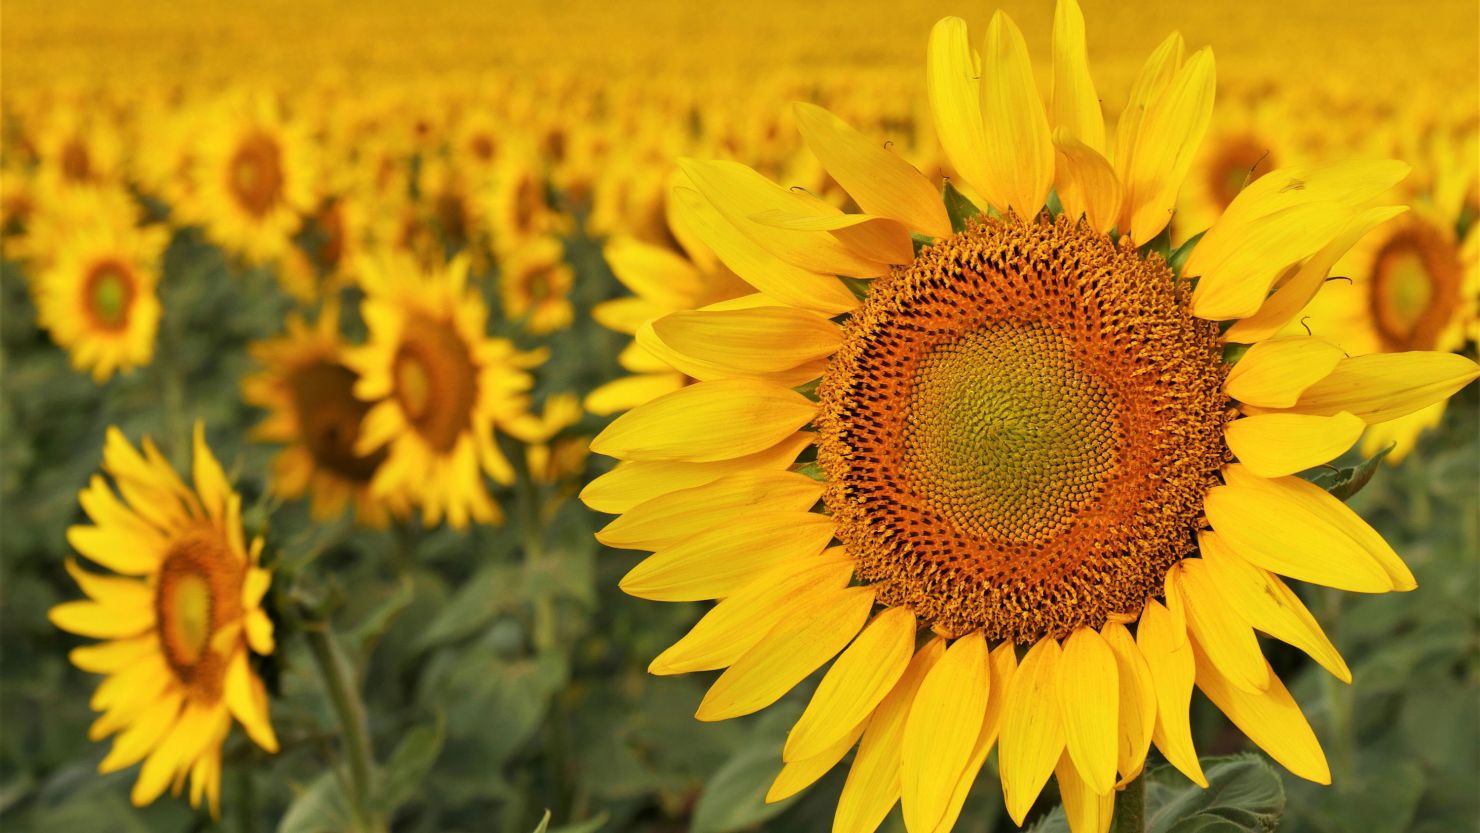 Sunflower tourism is big business for farms and parks across the country. 